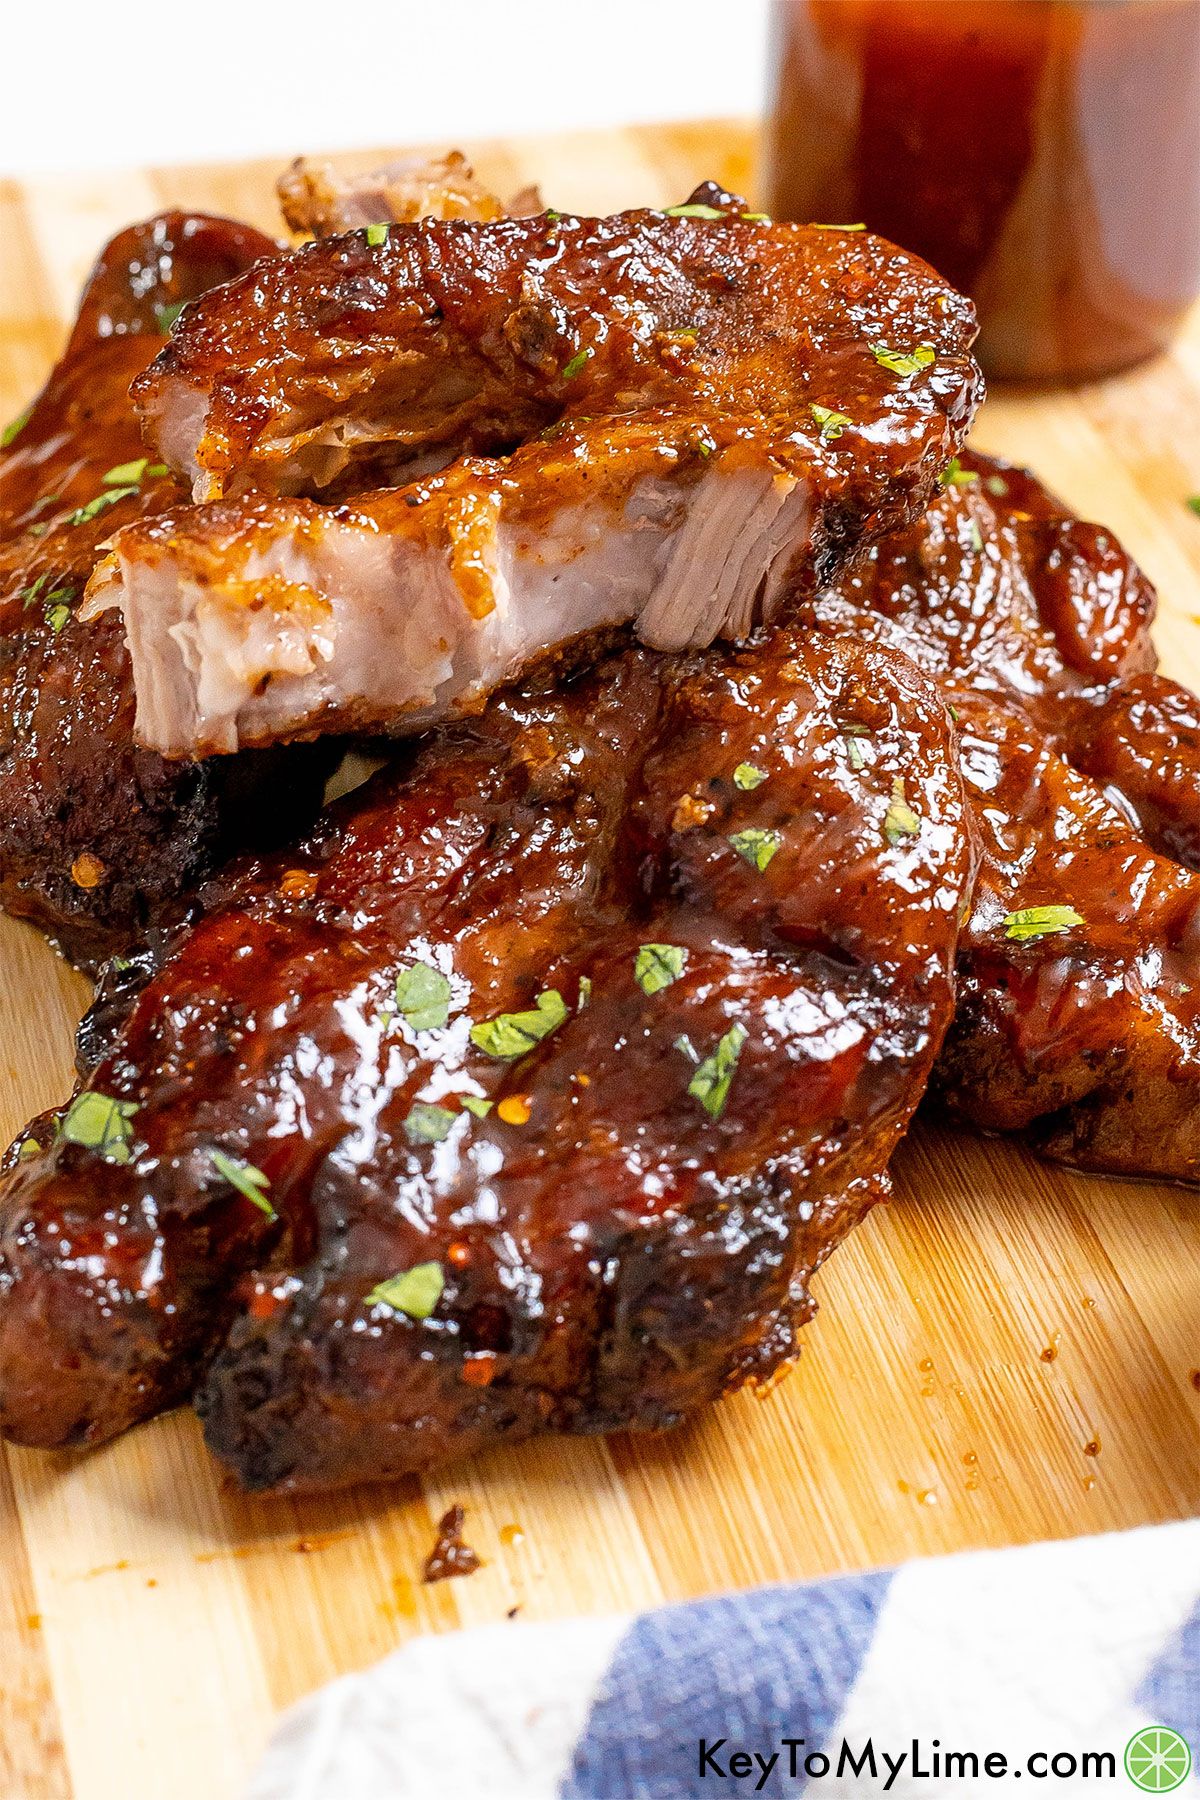 A pile of country style ribs with one pulled apart to show the tender texture.